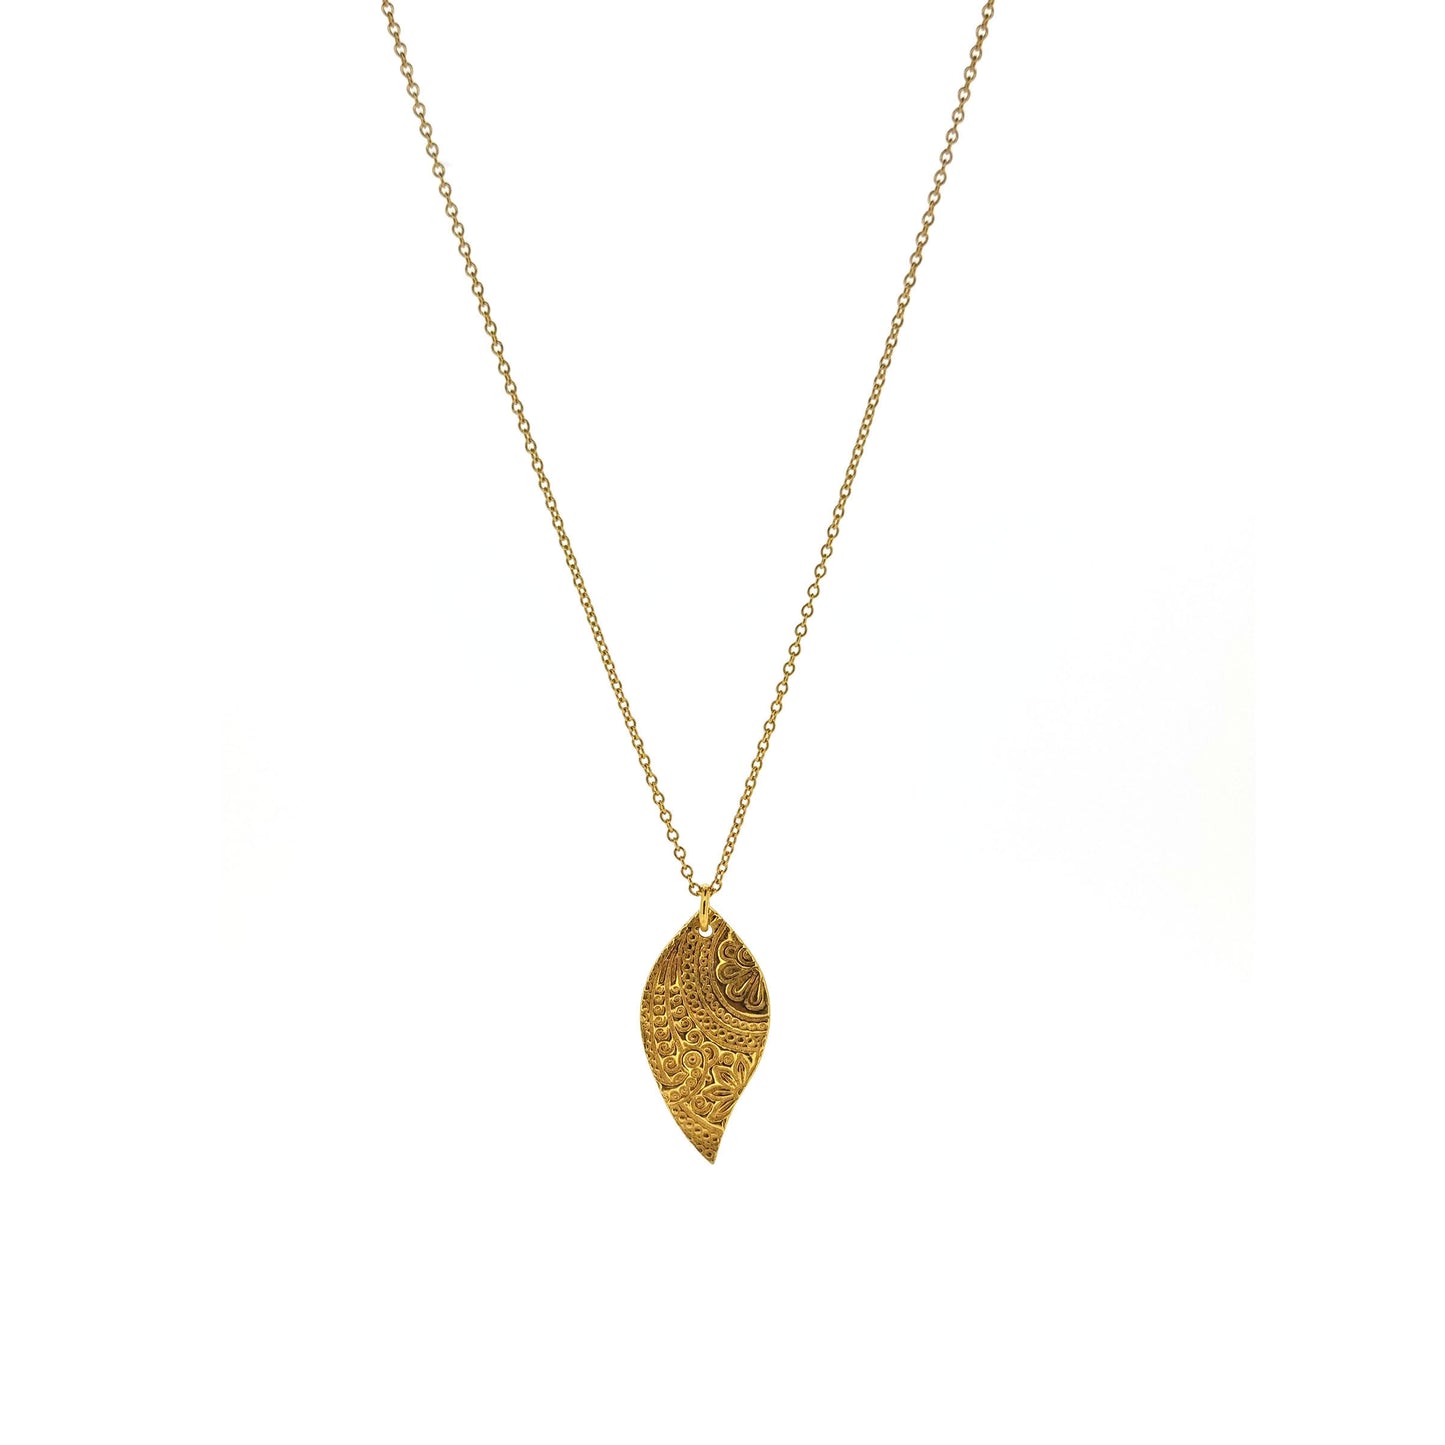 Yellow gold vermeil leaf-shaped patterned pendant on a yellow gold vermeil chain. Large.